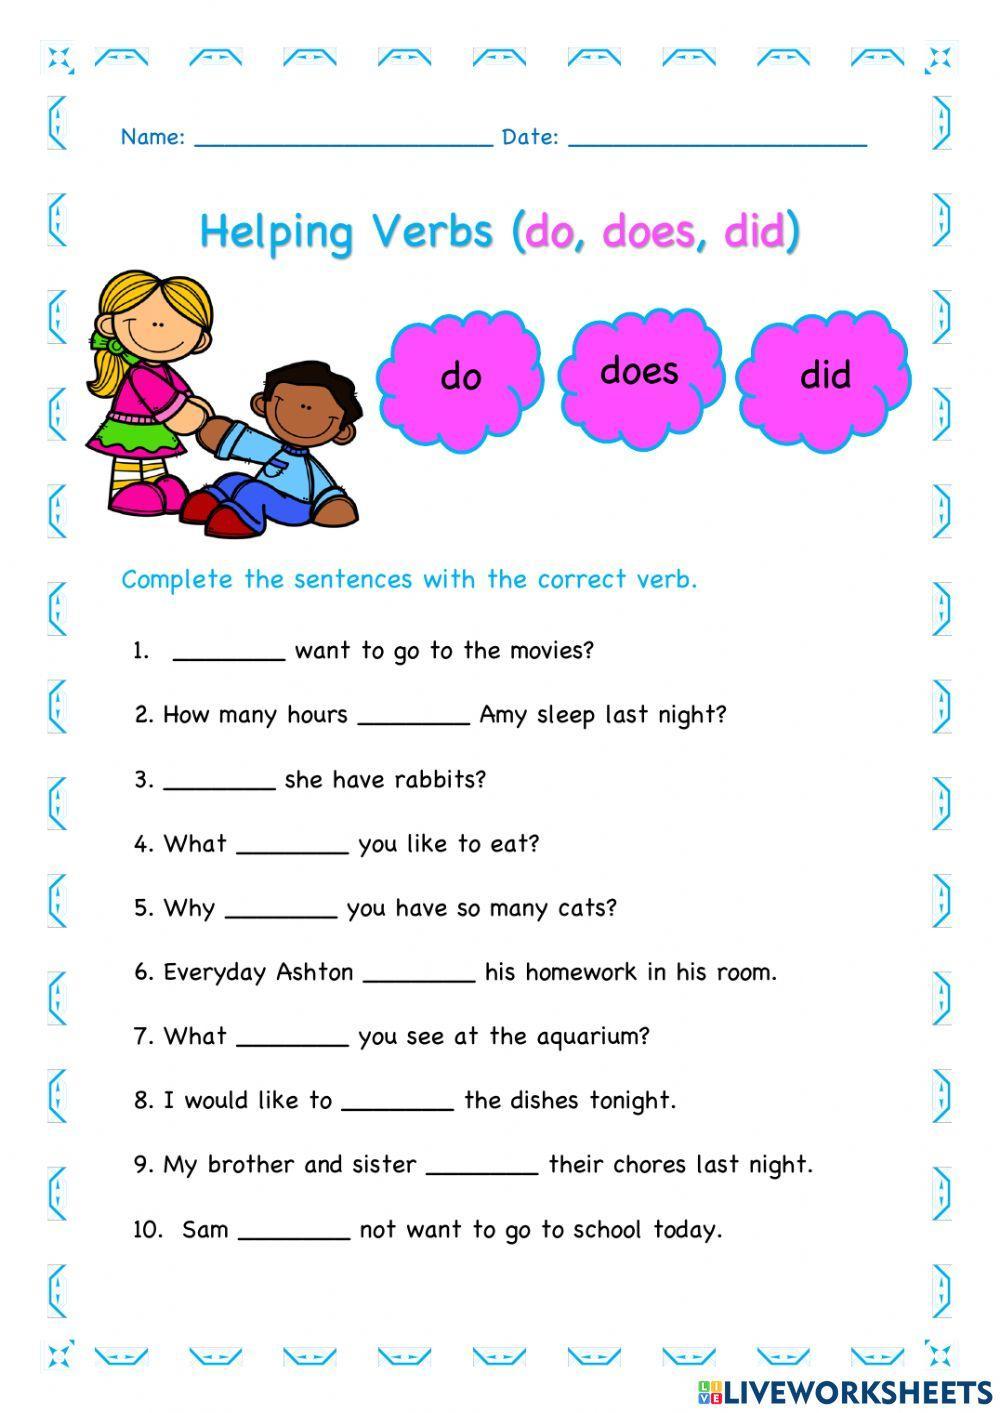 Helping Verbs (do, does, did)